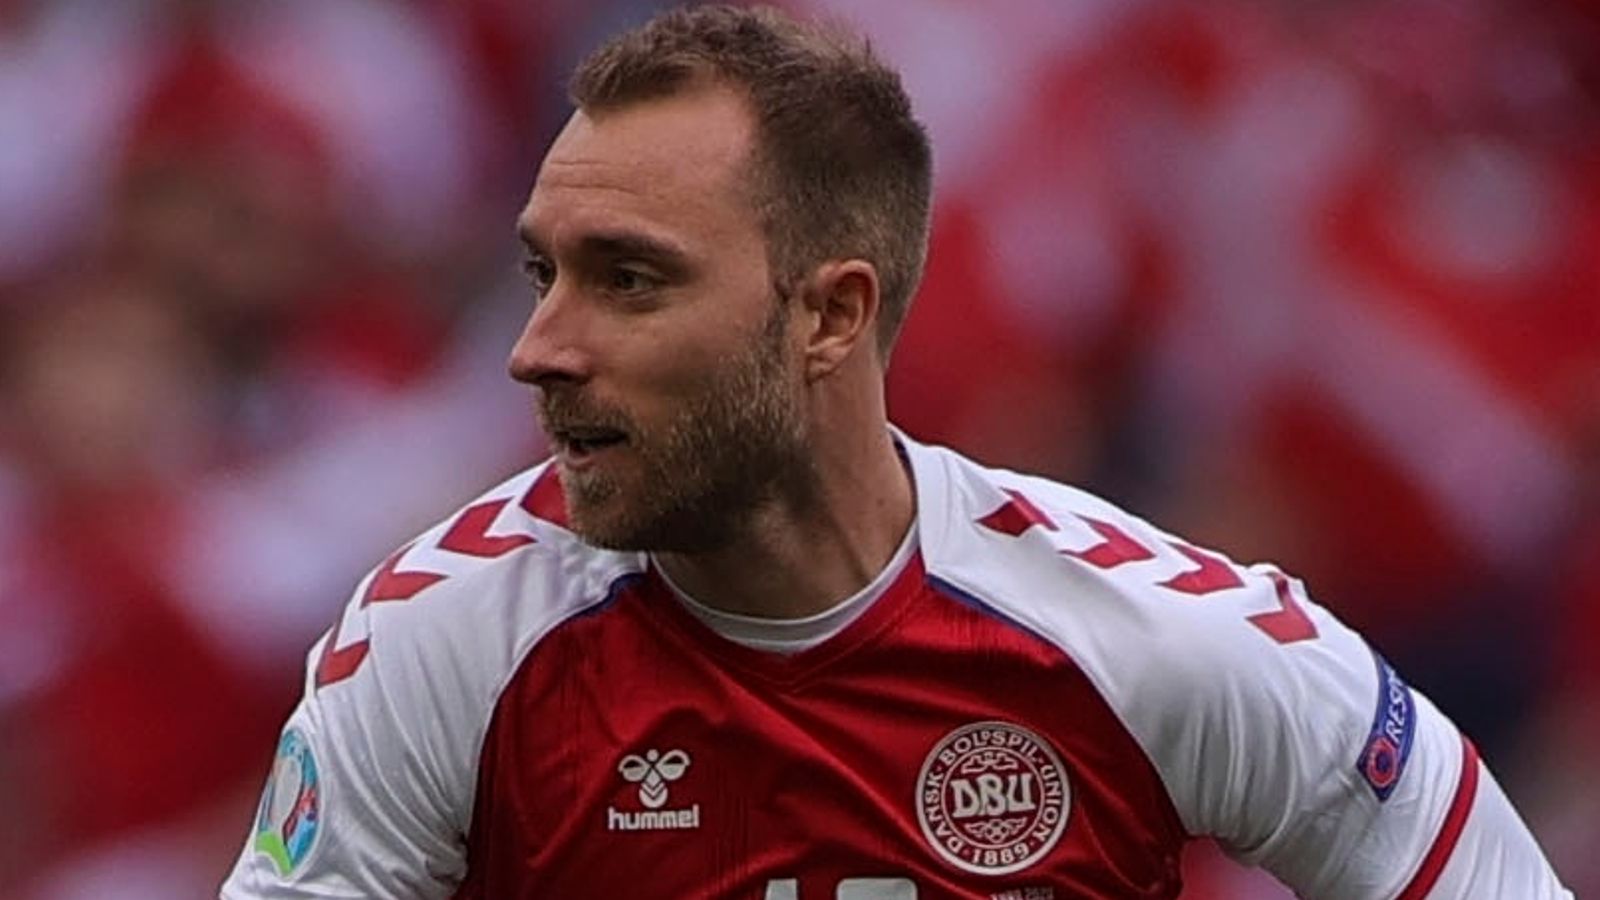 Christian Eriksen: Denmark midfielder pictured in public for first time since le..